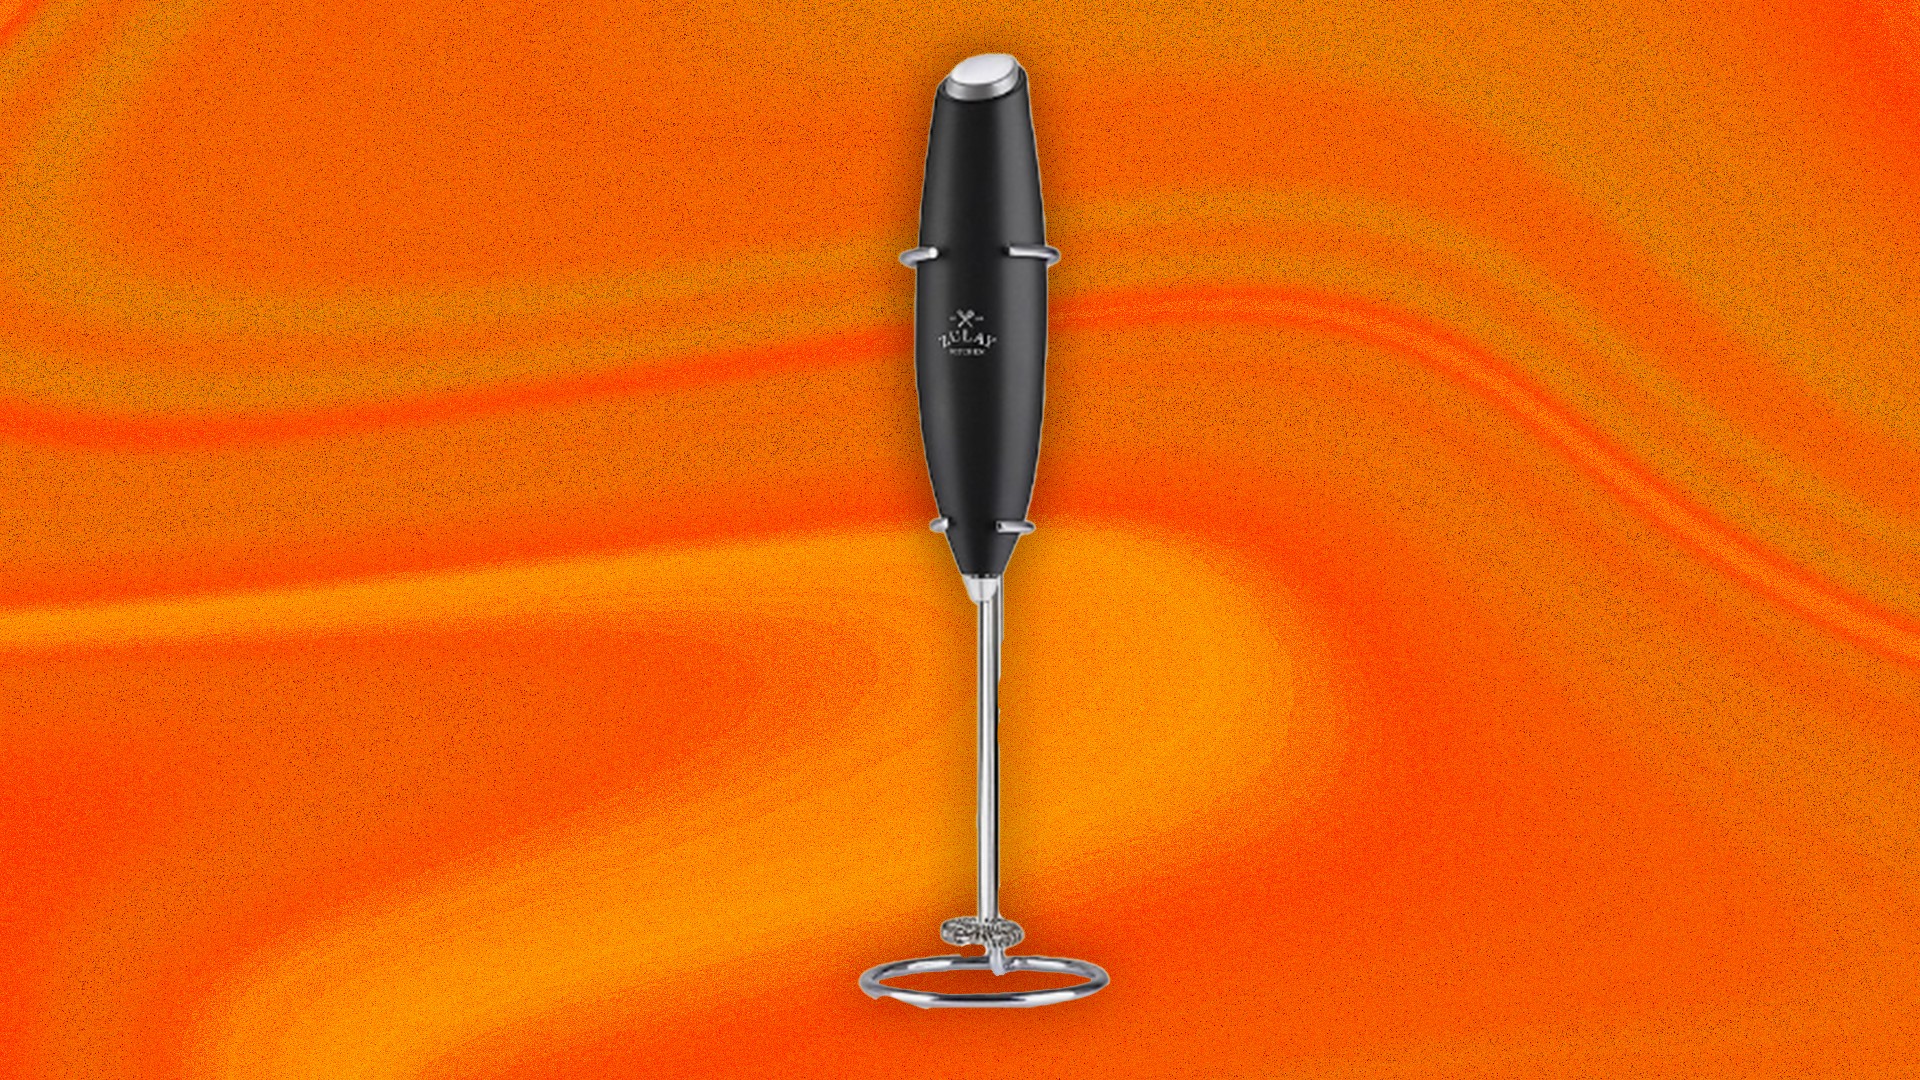 Zulay original milk frother is now on sale.